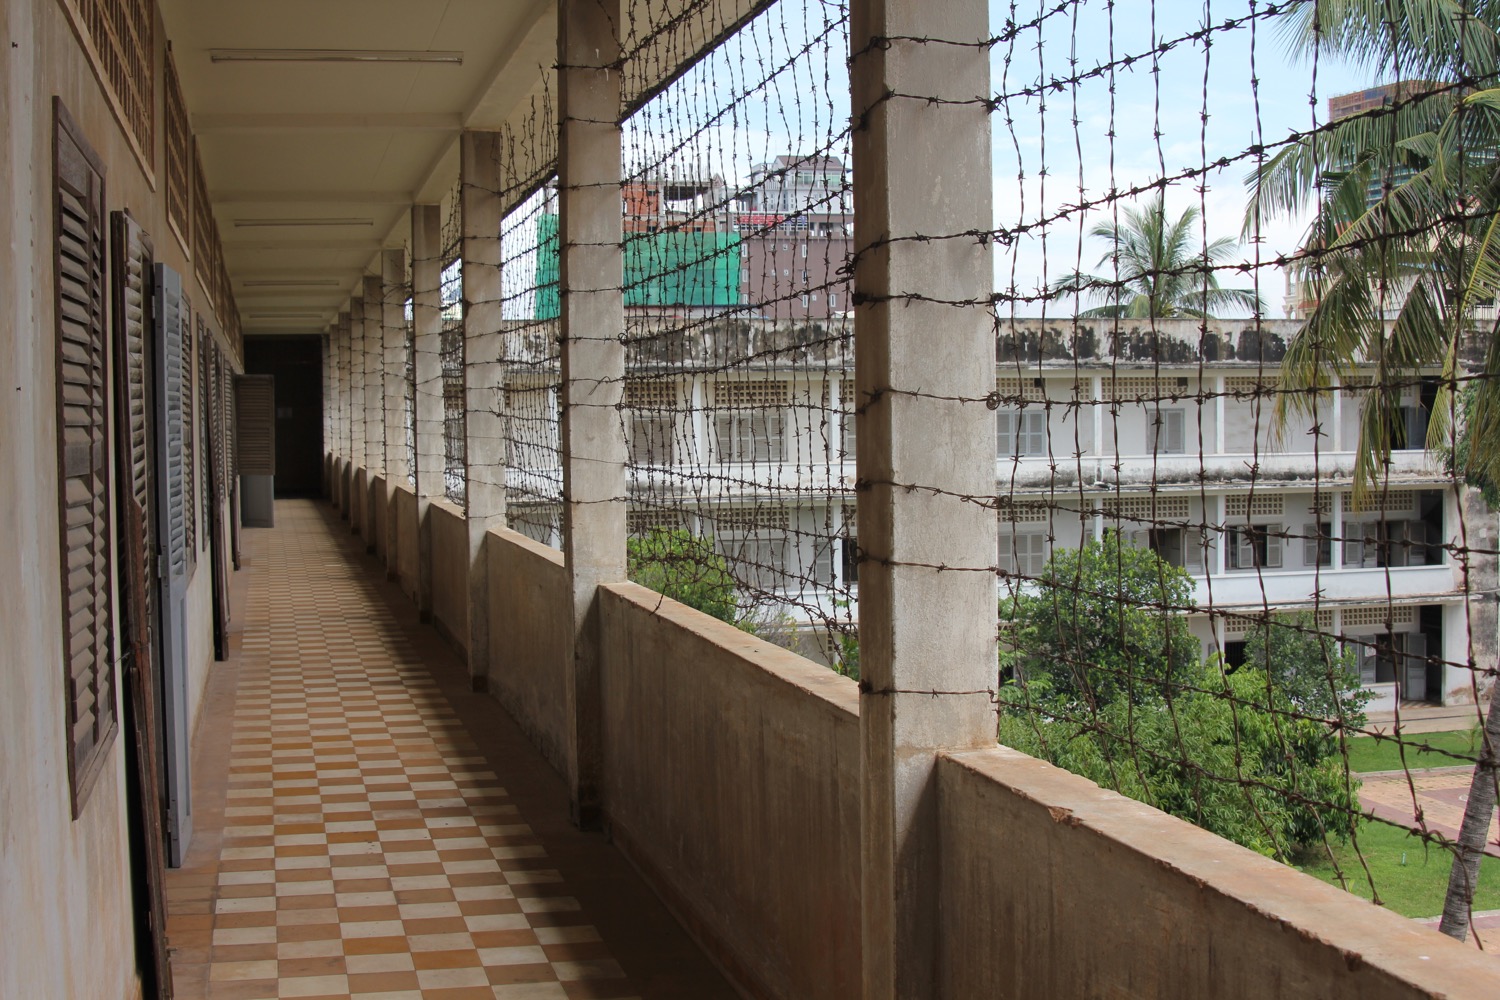 Tuol Sleng Genocide Museum - 18